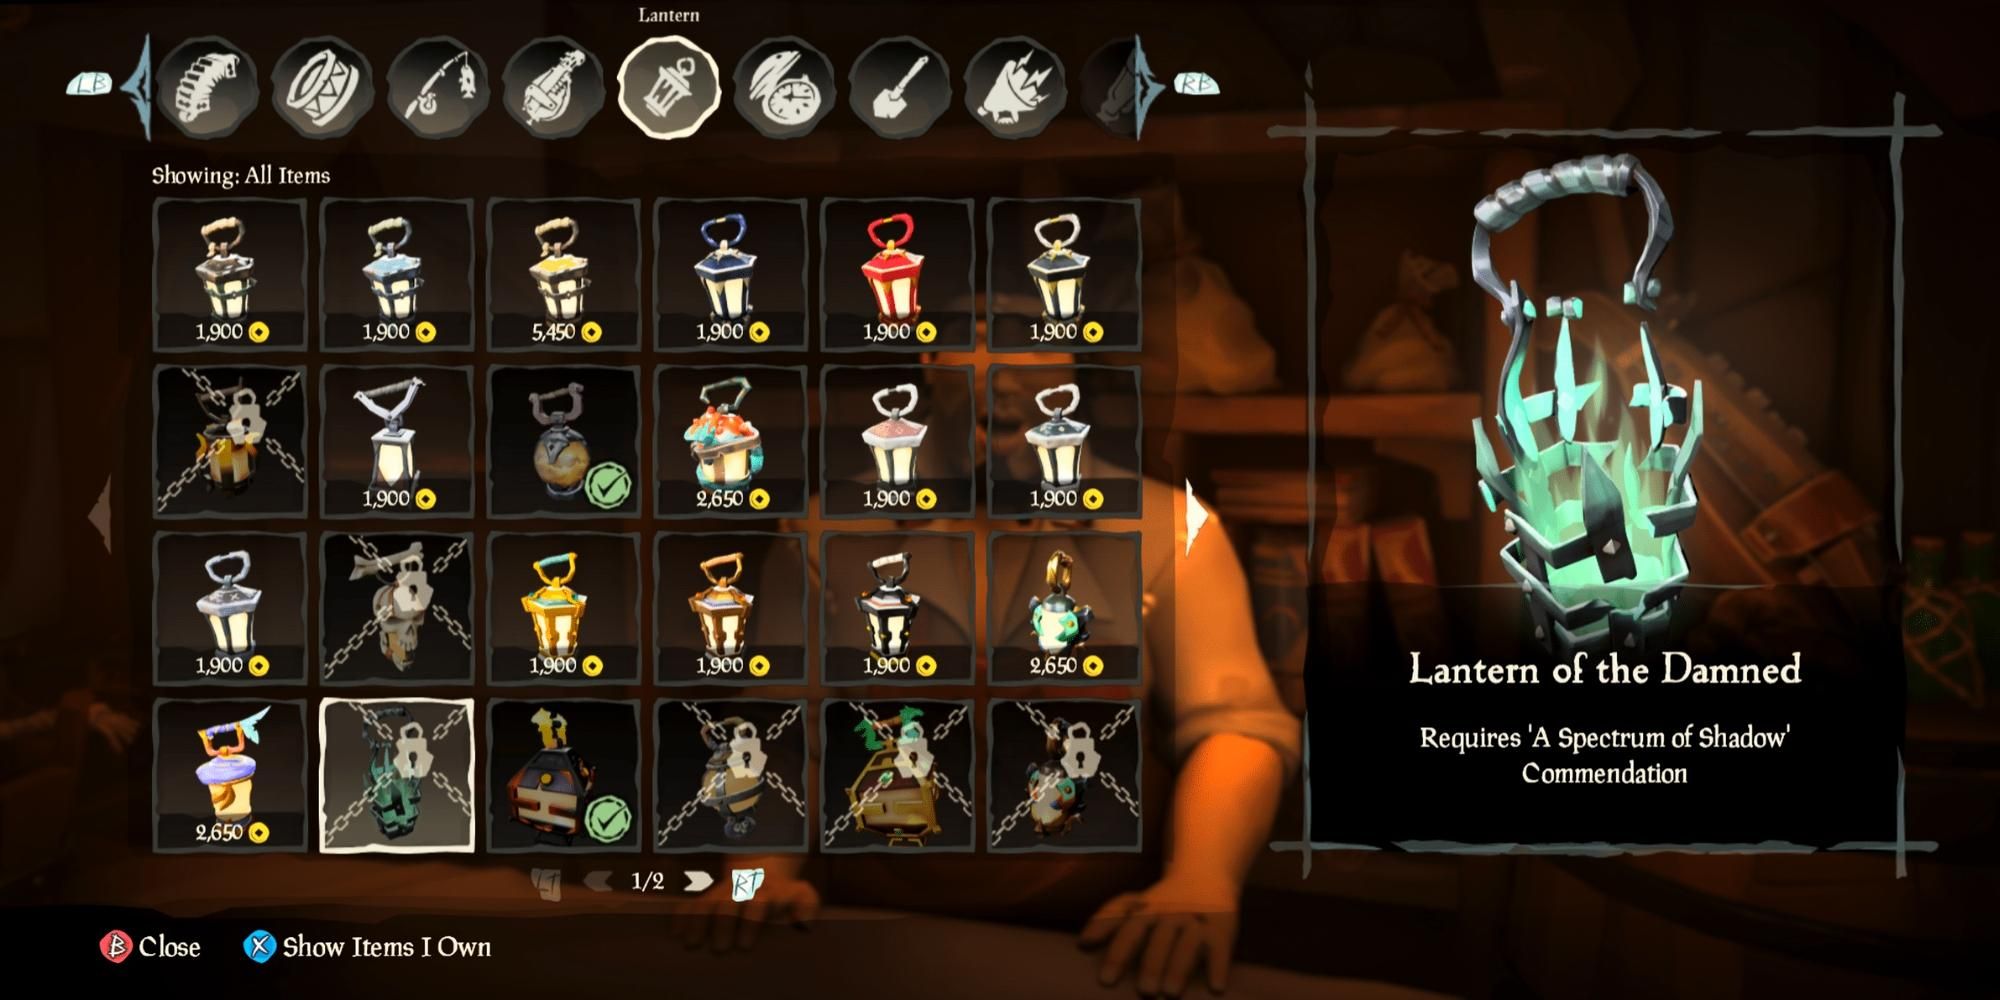 Lantern of the Damned in the equipment shop in Sea of Thieves